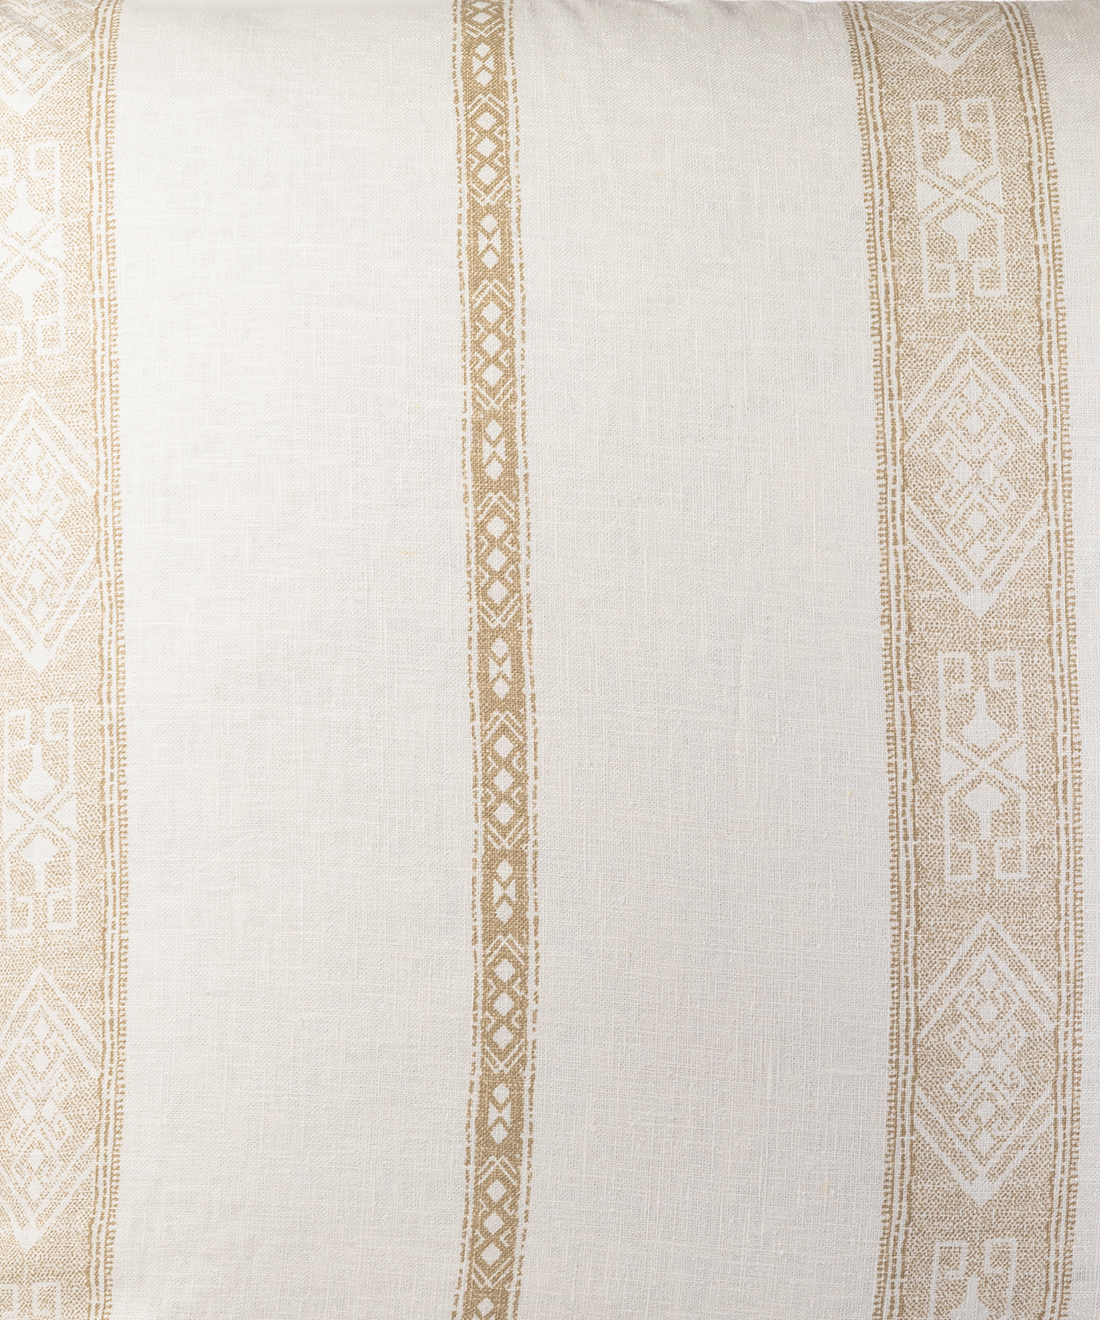 Whiteman & Mellor's Casablanca Stripe Stone on Stubbed Cotton, Fabric by the Meter